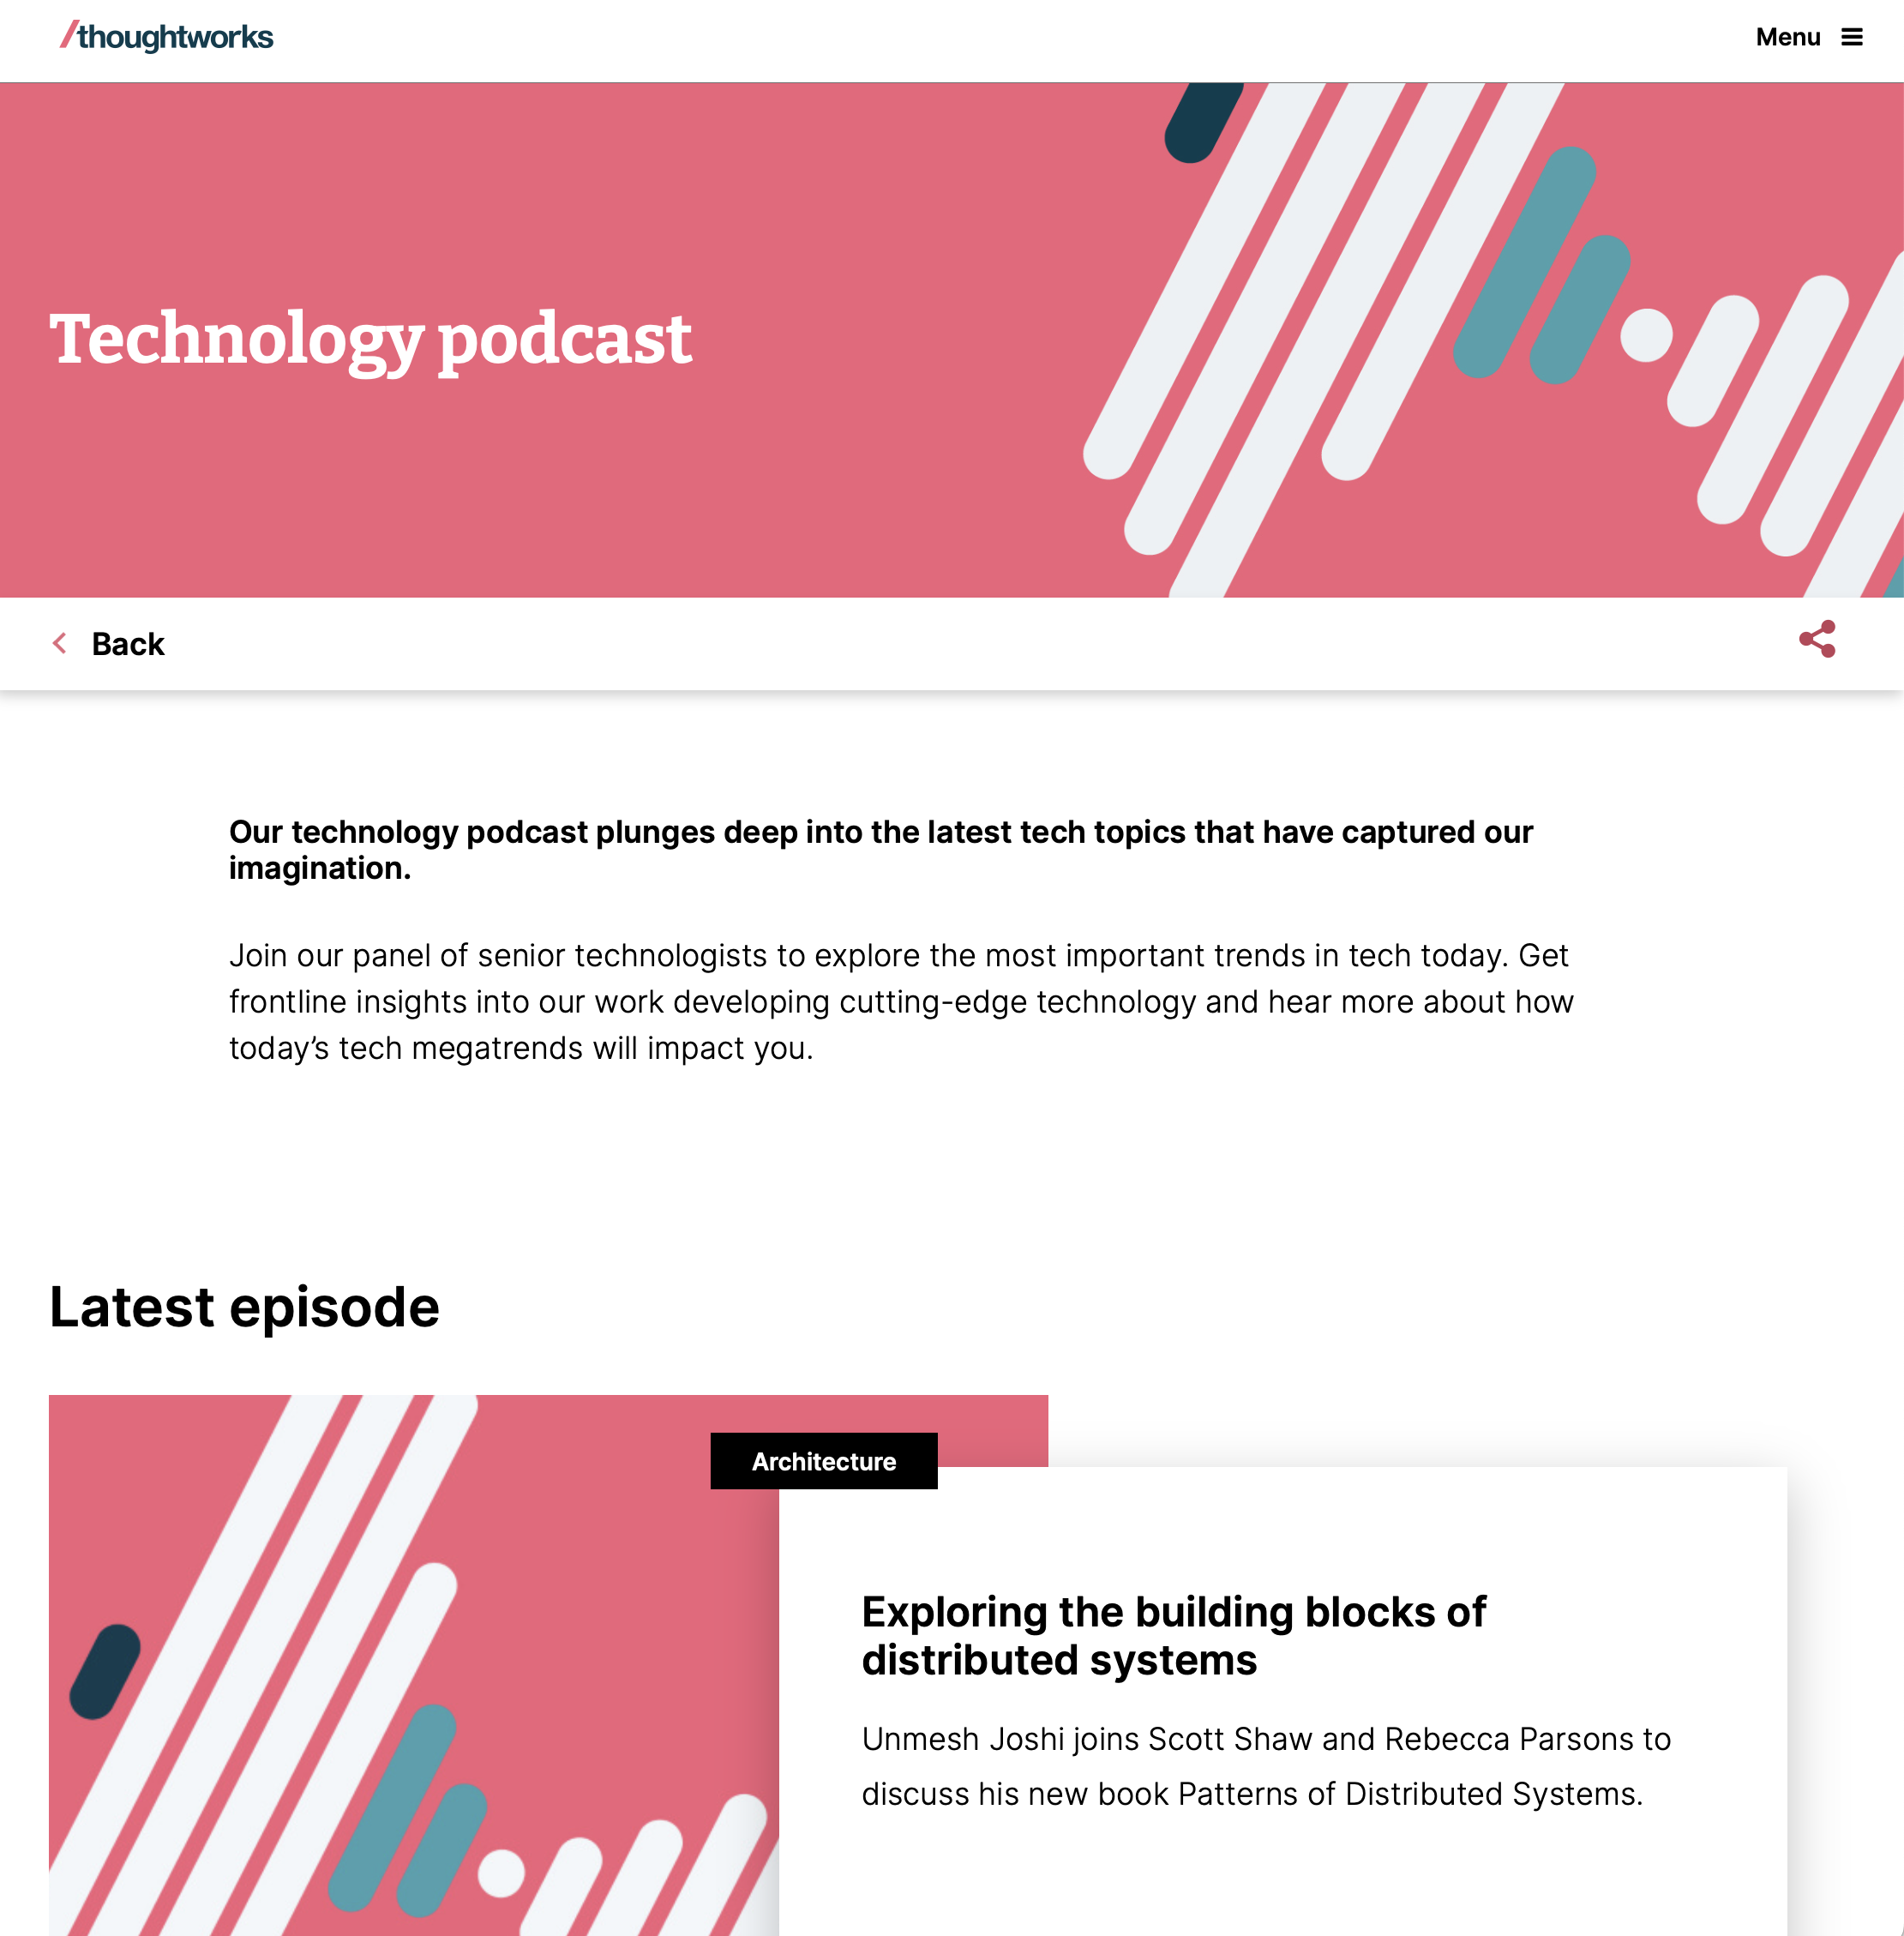 screenshots/thoughtworks-technology-podcast.png